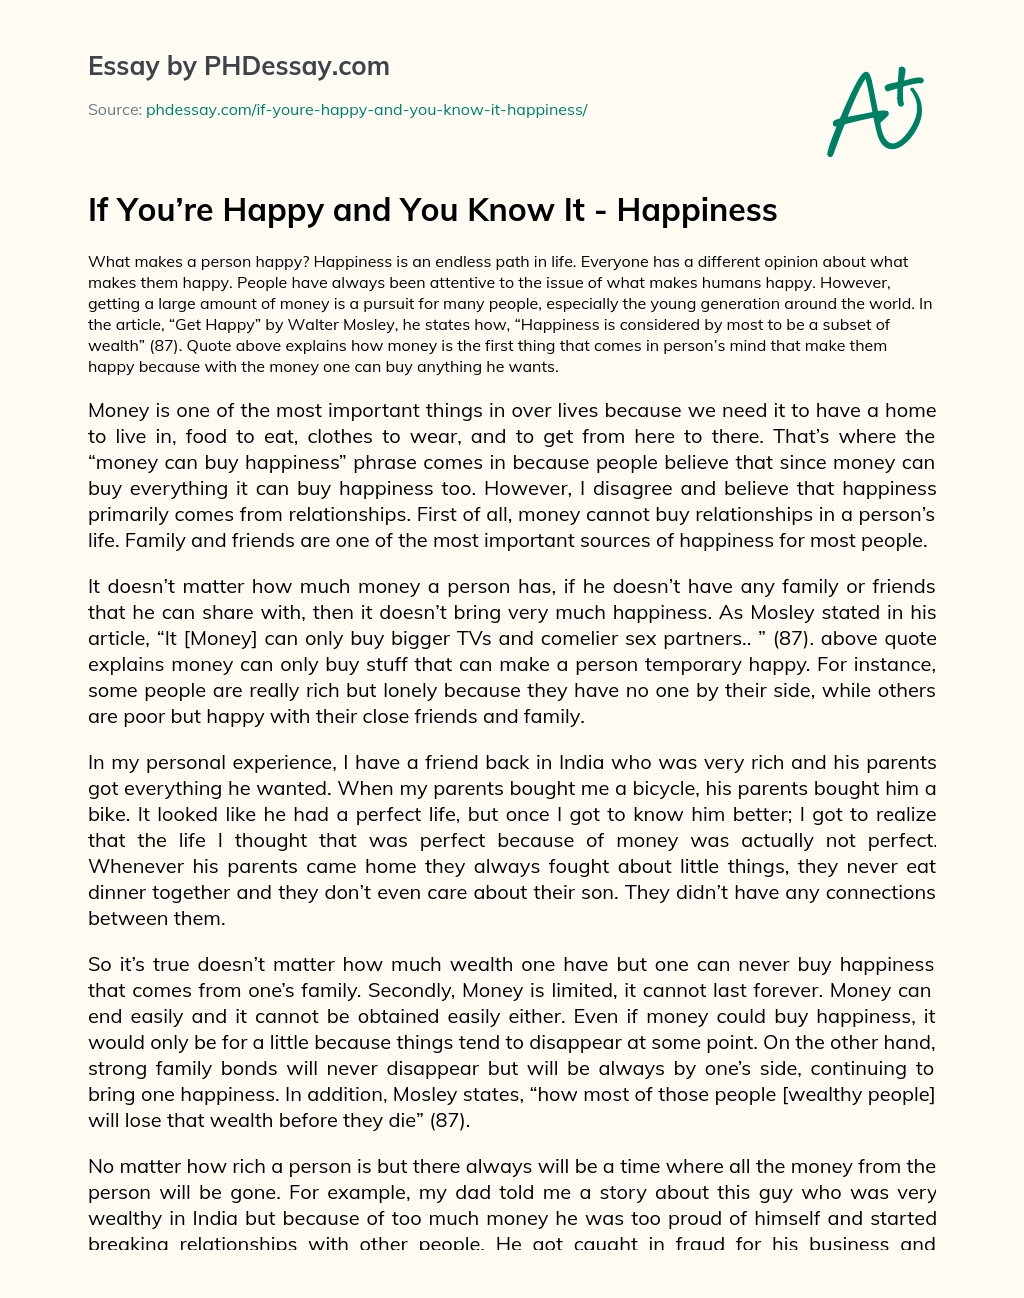 If You’re Happy and You Know It – Happiness essay